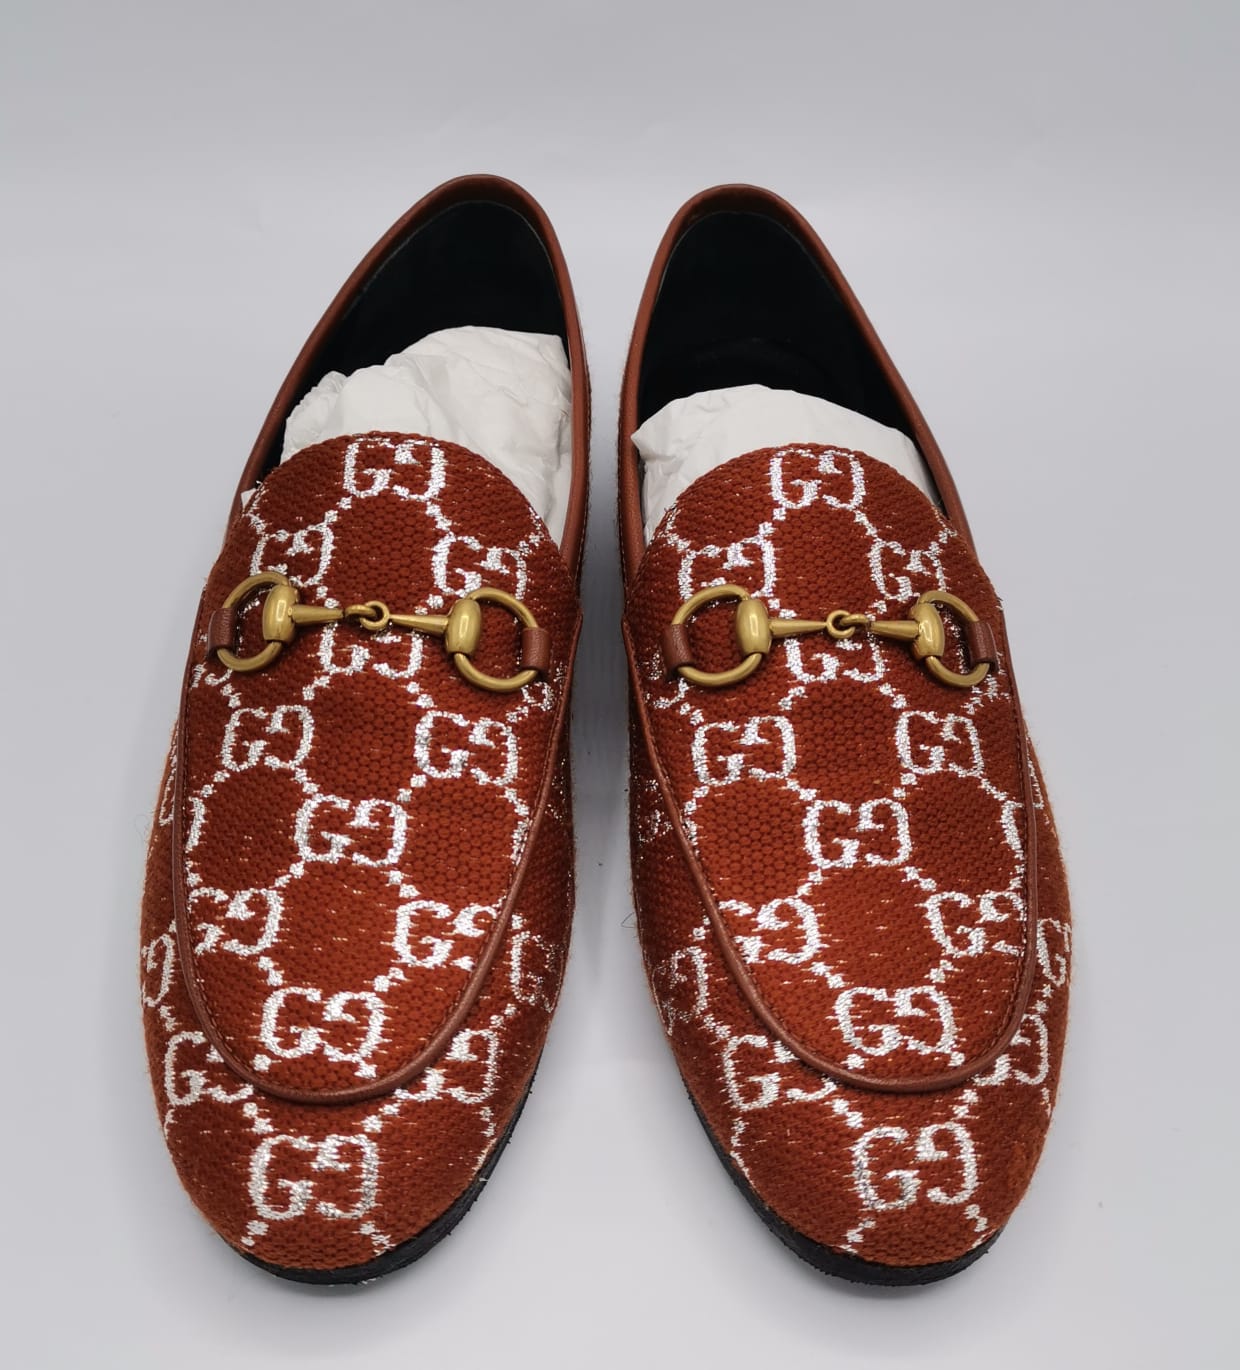 Gucci GG loafers size 36 current RRP £560